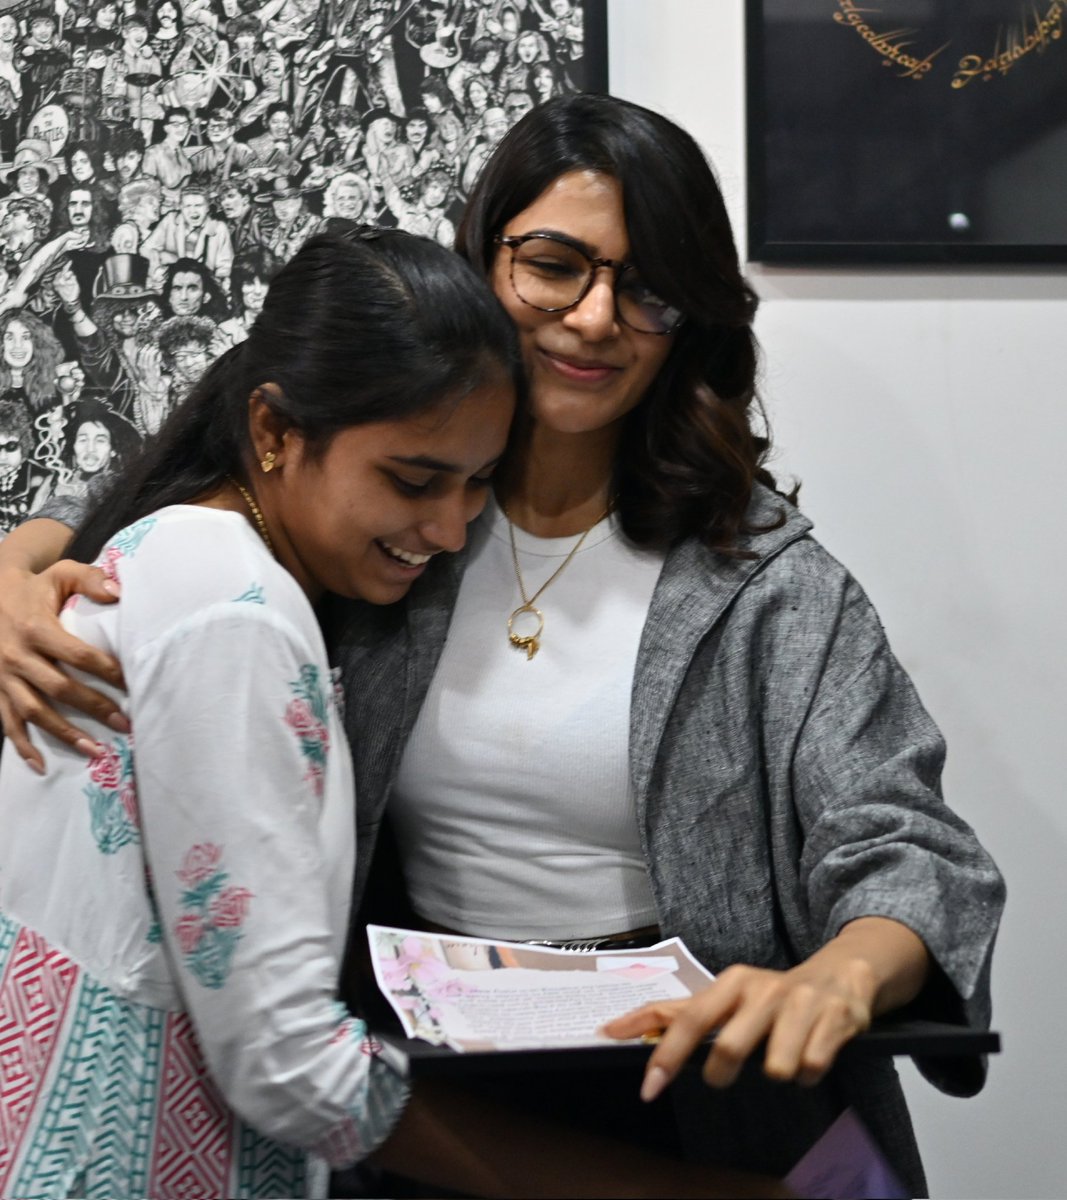 Finally i met my love ❤️❤️😭. I got emotional after seeing you sam. I can't control my tears. The Hug you gave me is 🥺🥹 thankyou so much papa for the beautiful moments. @Samanthaprabhu2 #Samantha #SamanthaRuthPrabhu